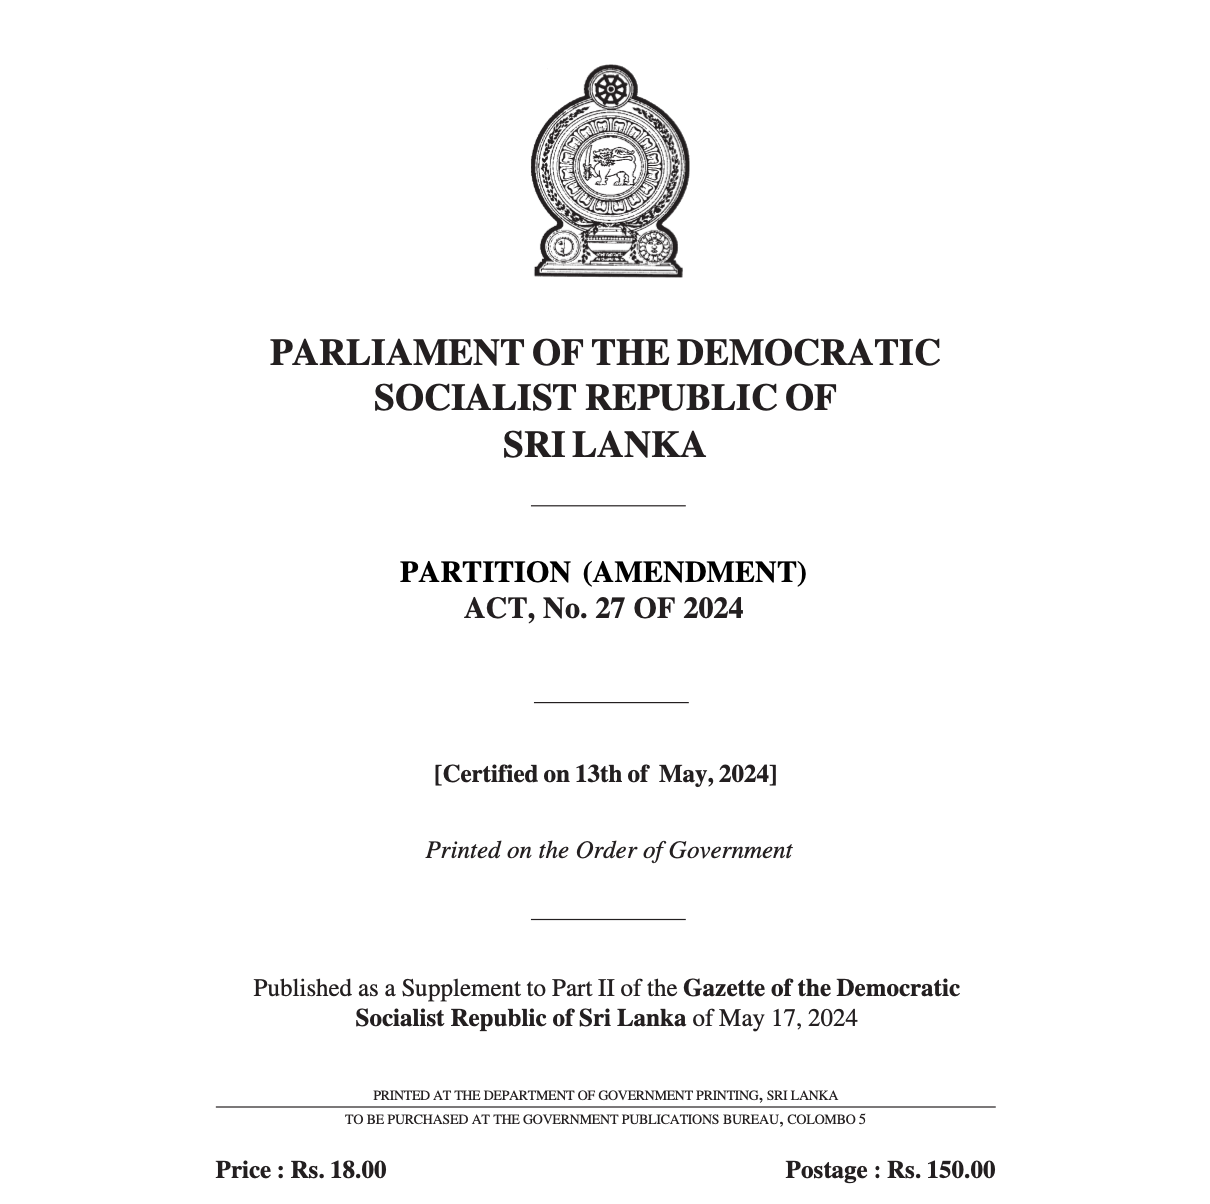 Latest Amendments to the Partition Act